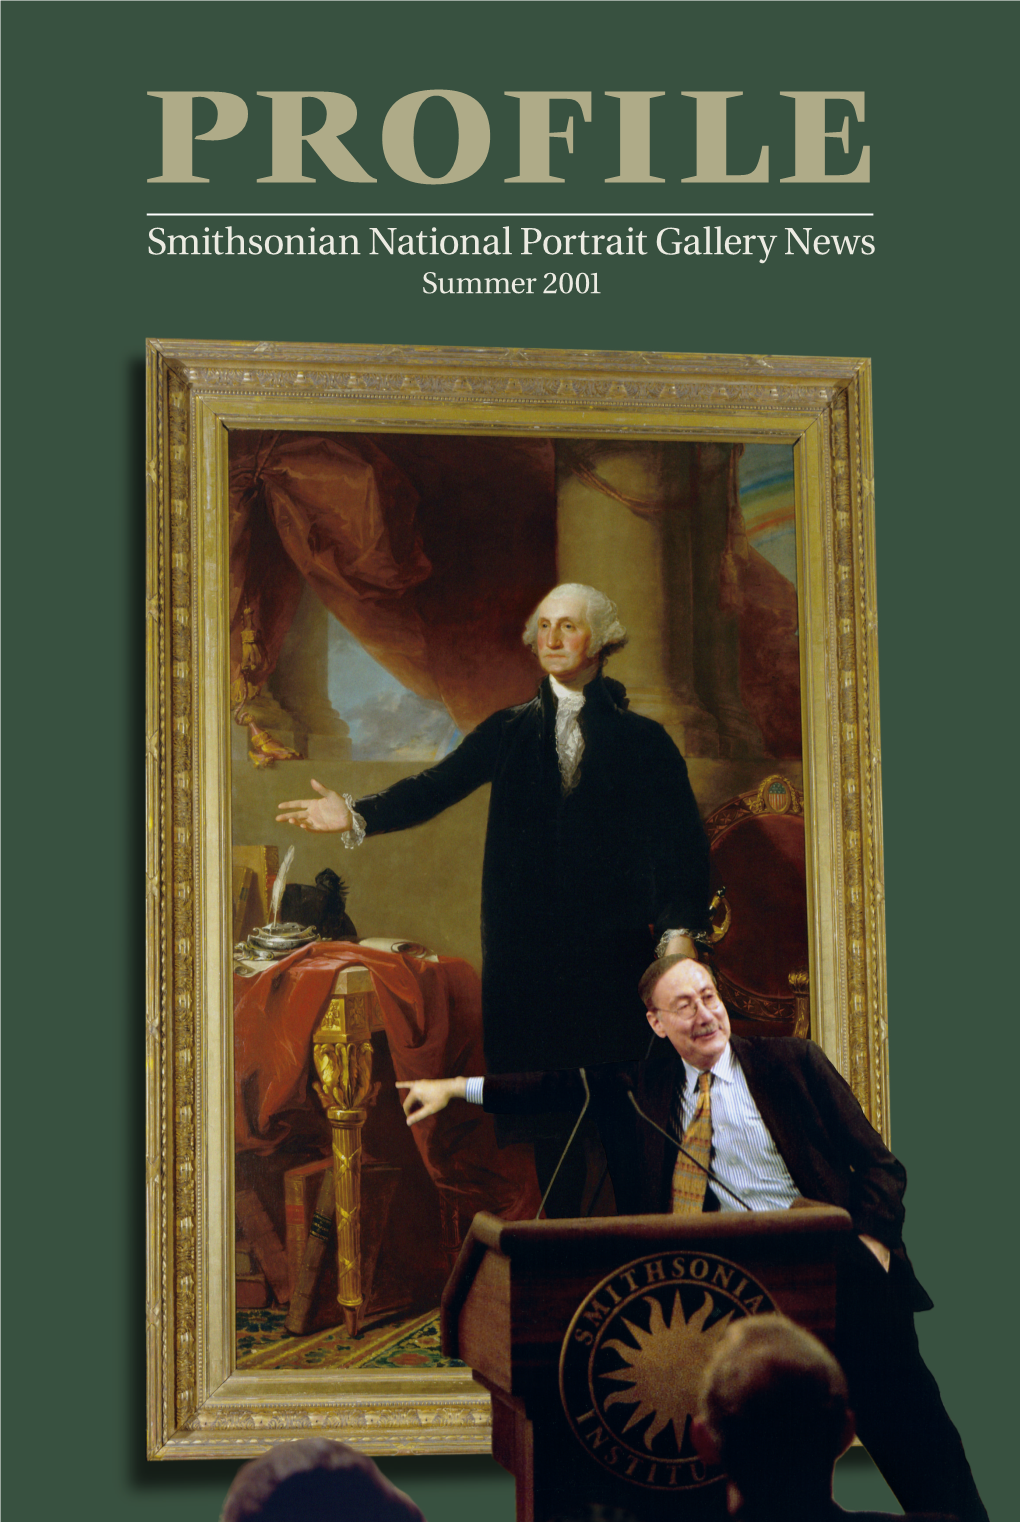 Smithsonian National Portrait Gallery News Summer 2001 from the DIRECTOR